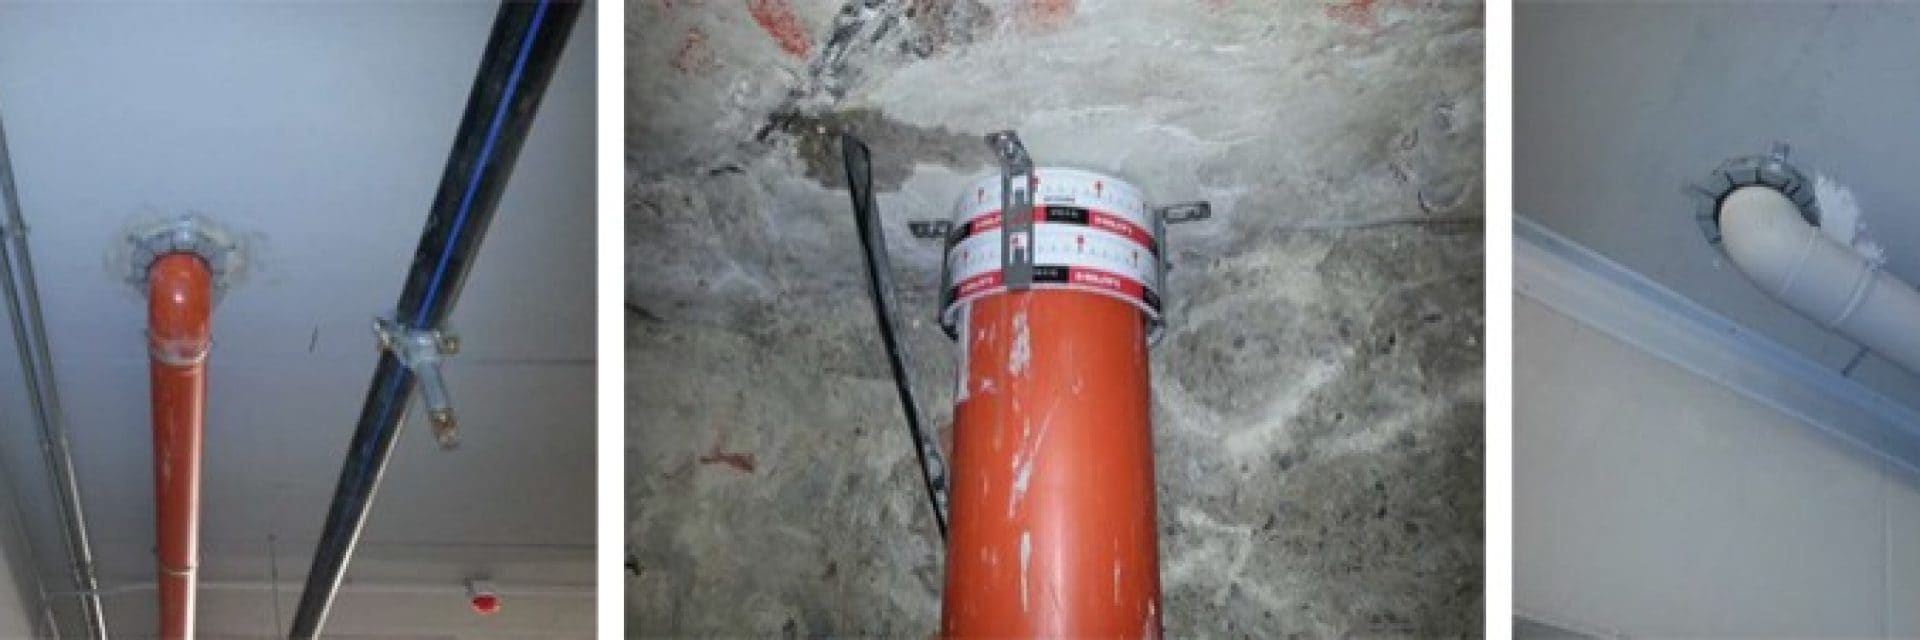 Hilti jobsite reference Bologna Central Station Italy